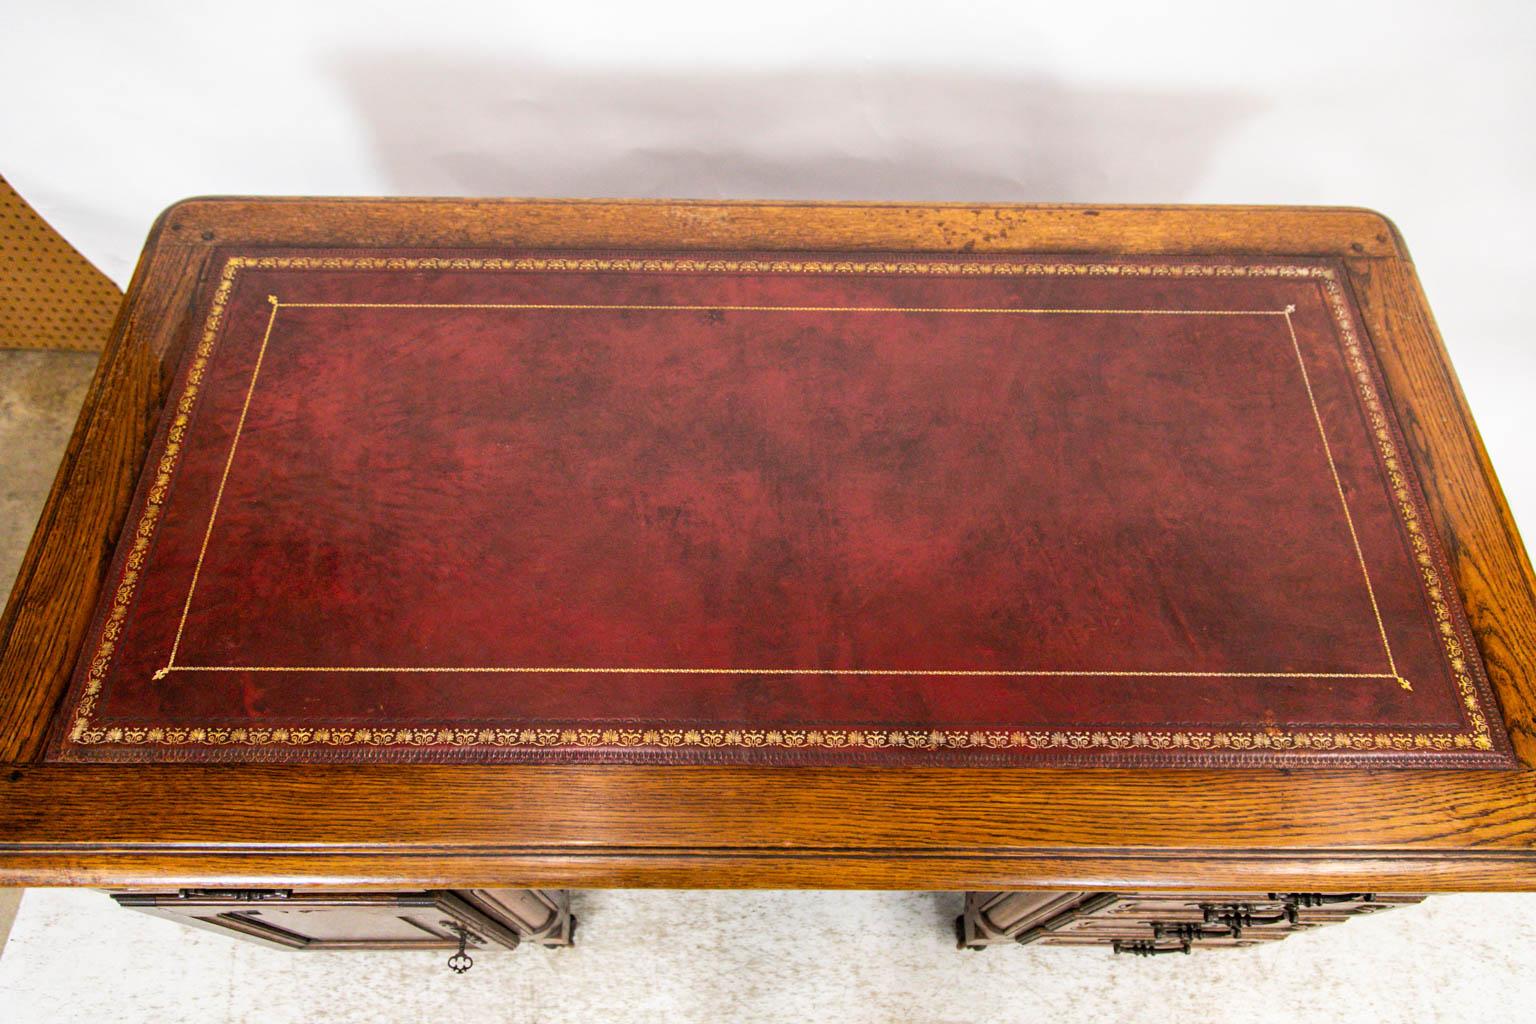 This French leather top desk is finished with shaped raised panels on the back and the sides. The hardware is original. There is exposed double peg construction on the top and front. The leather top is a burgundy with gold detailing around the edges.